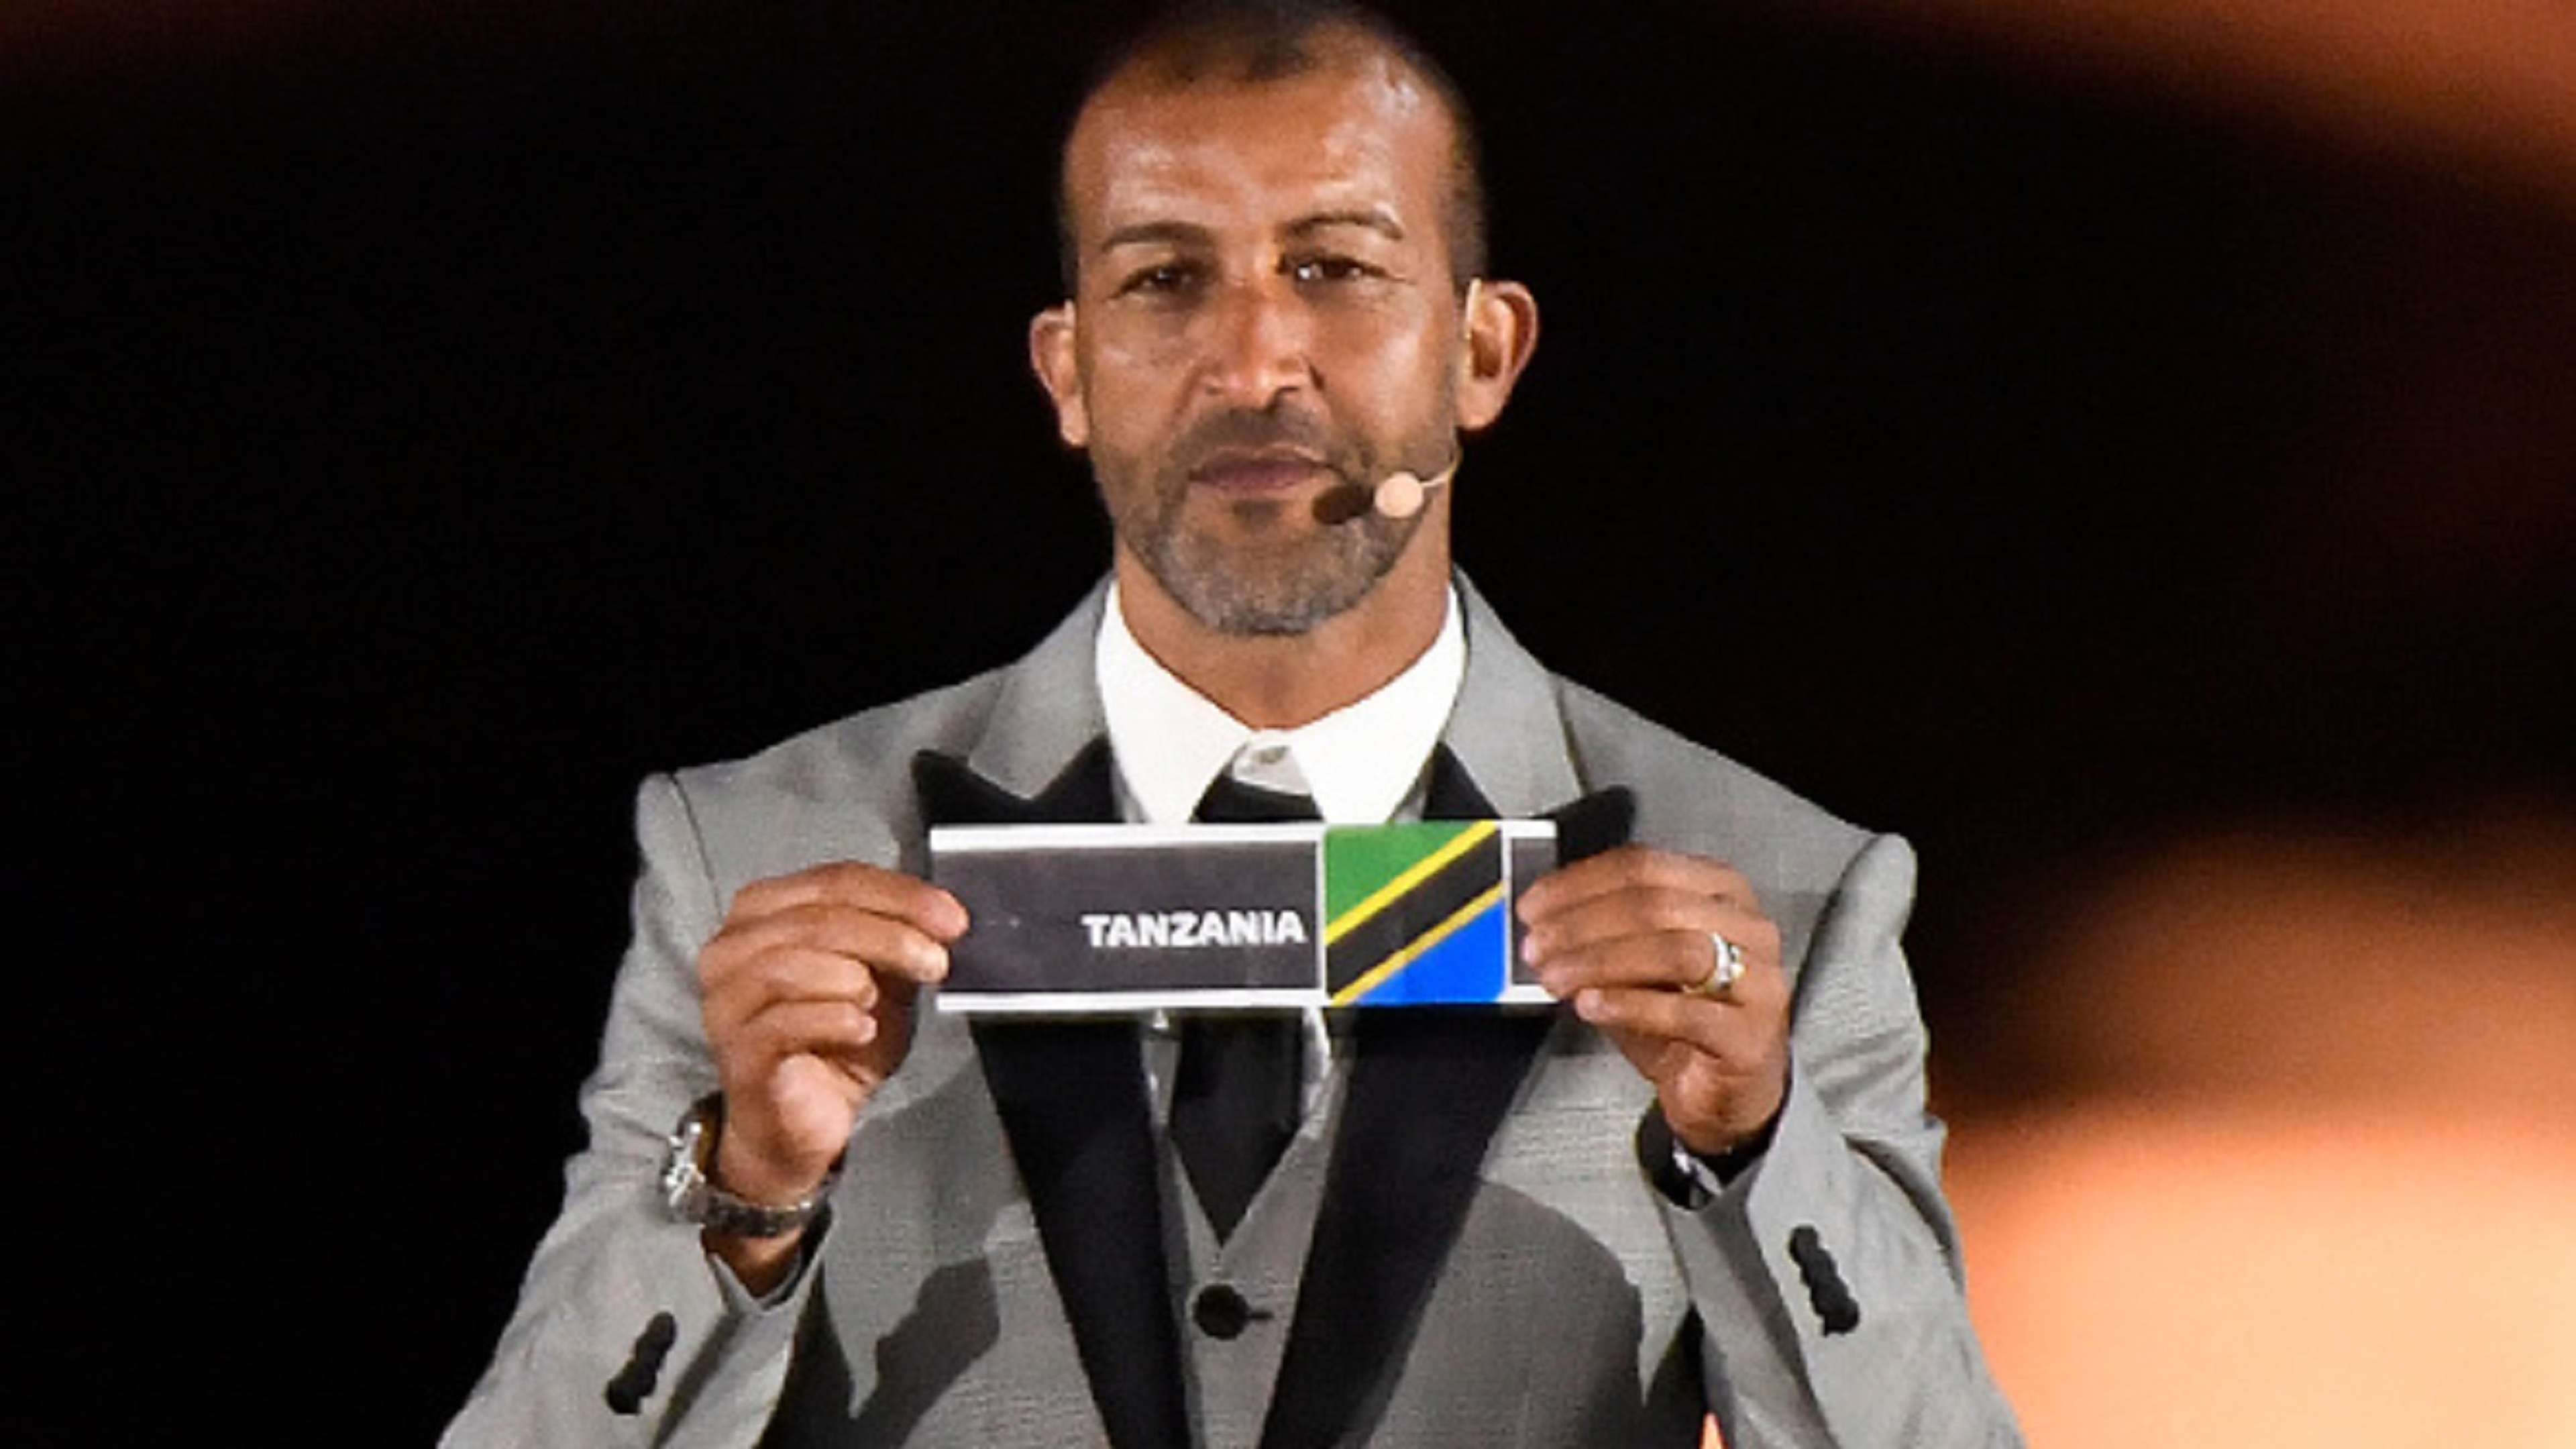 Former Moroccan forward Mustapha Hadji shows Tanzania's ballot the 2019 CAF African Cup of Nations (CAN) draw